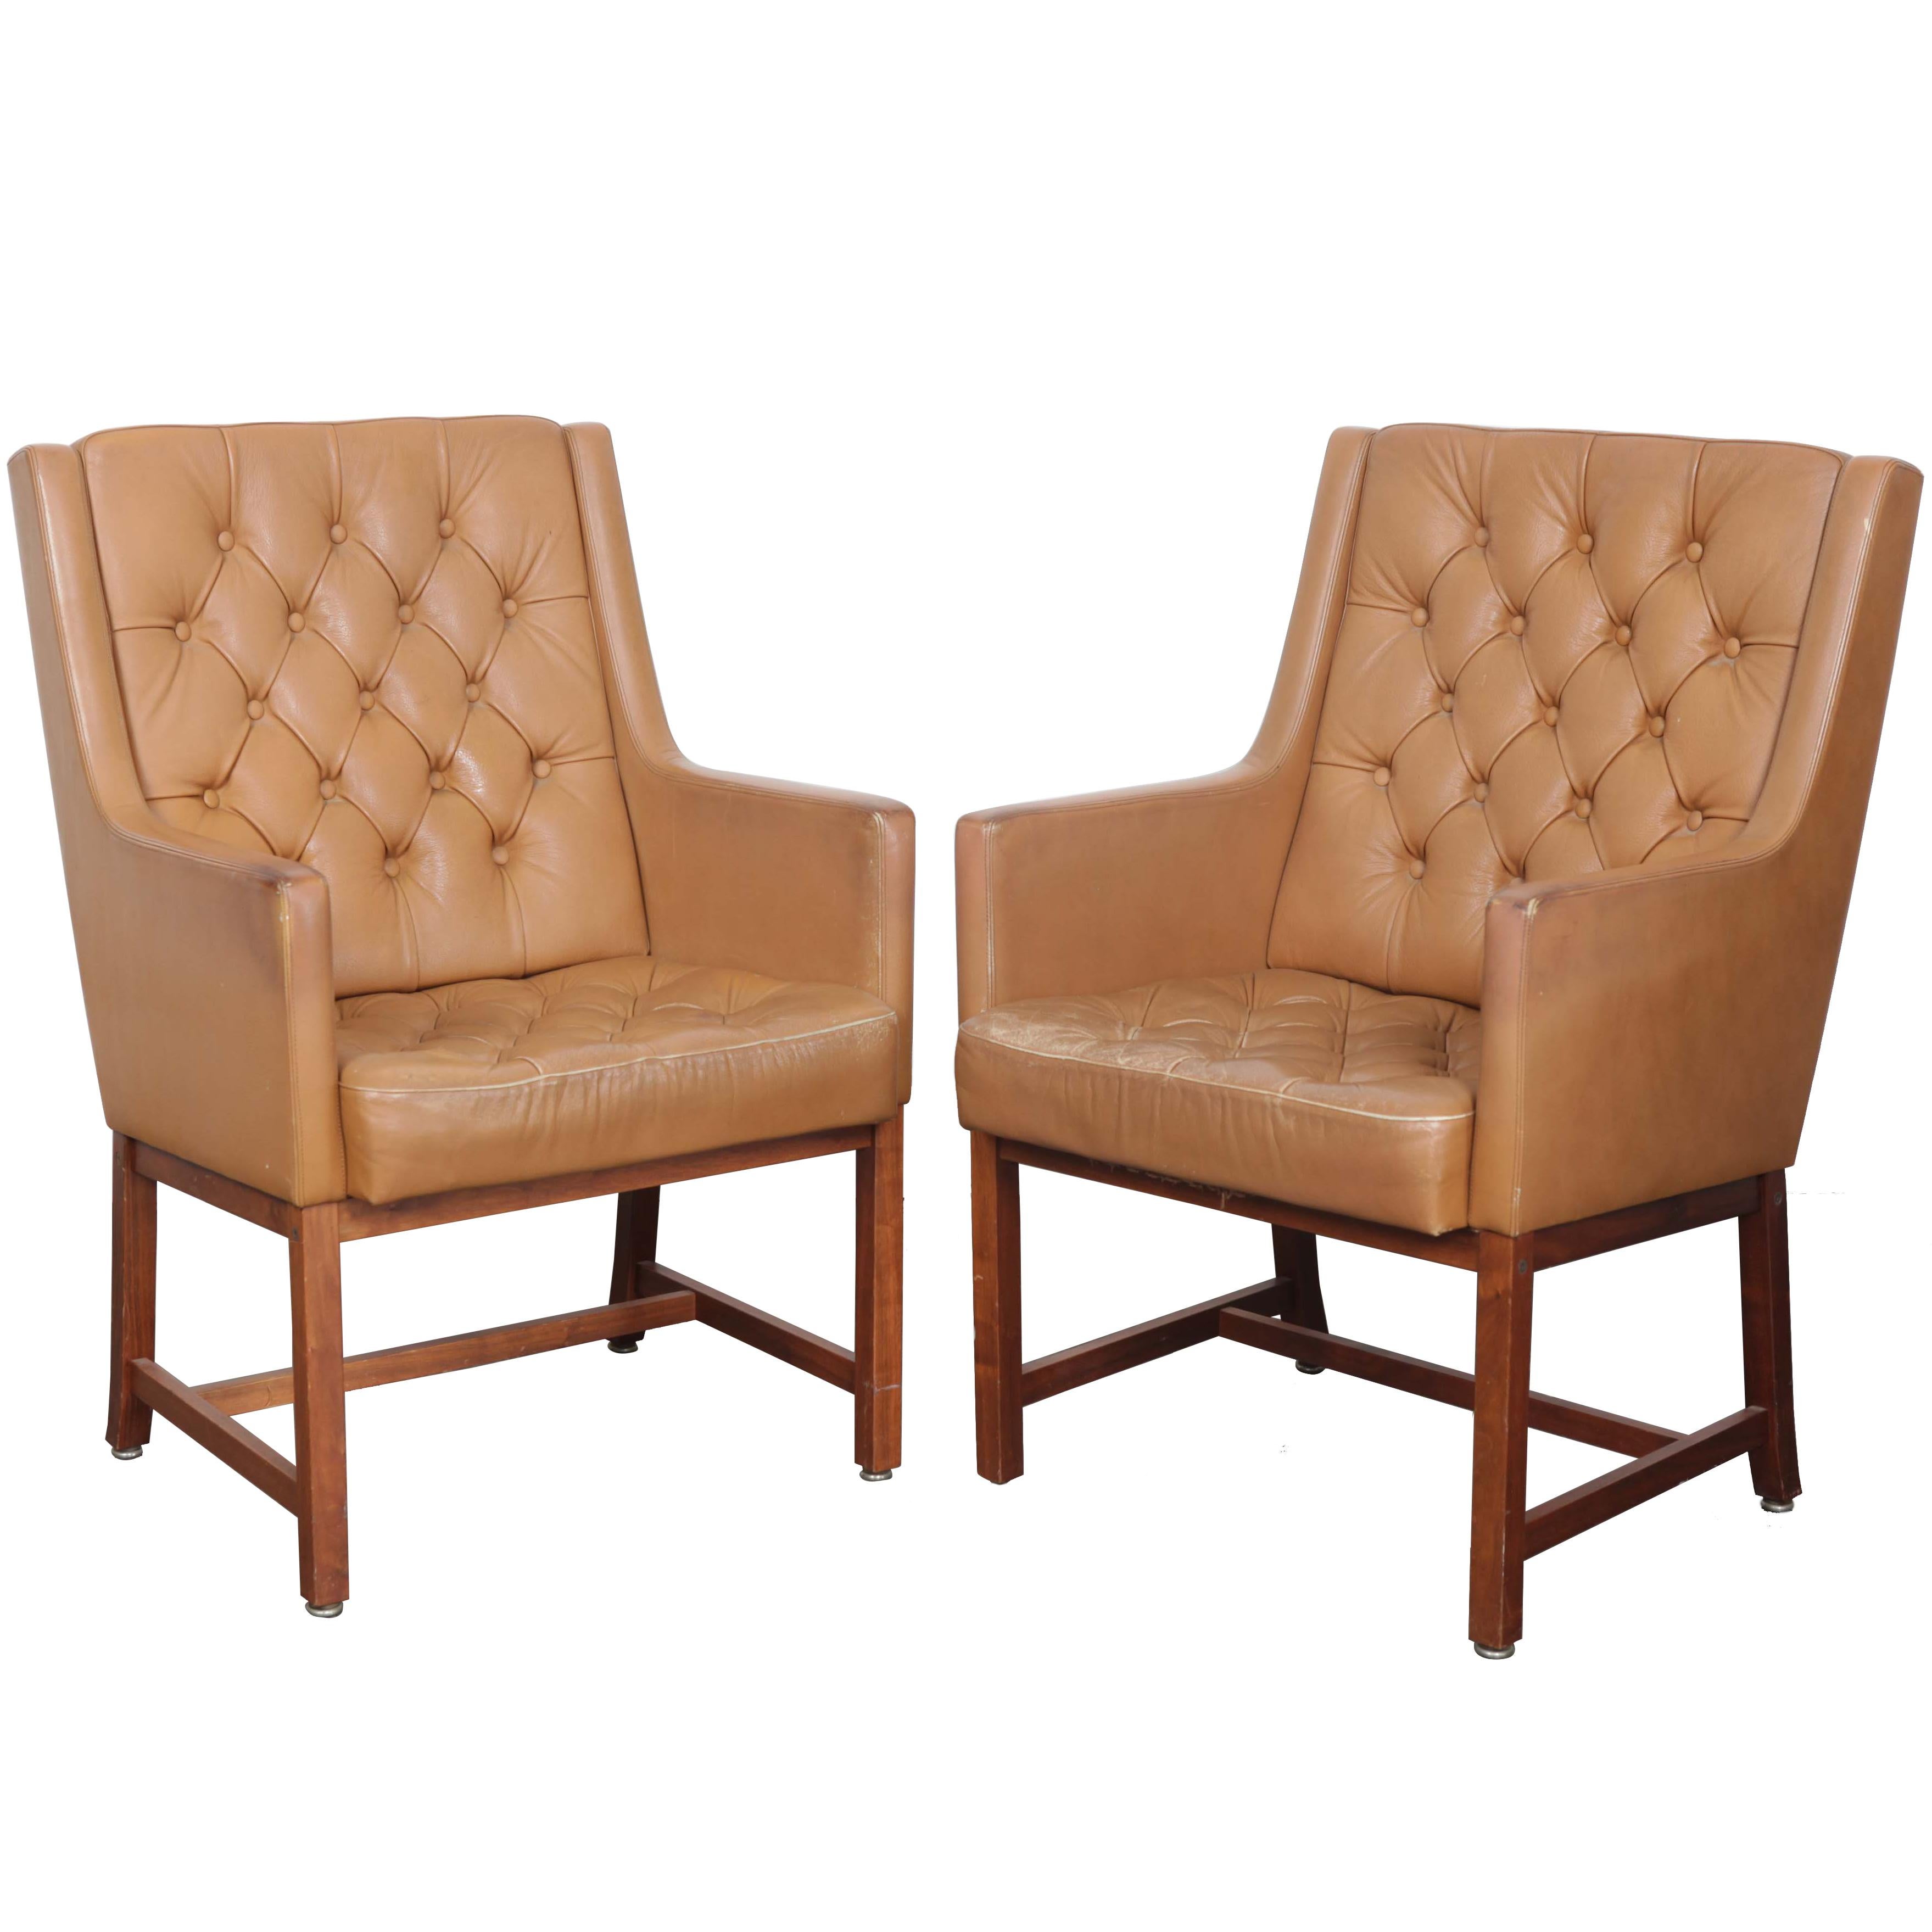 Pair of Karl Erik Ekselius Tufted Leather Chairs for JOC, Sweden For Sale